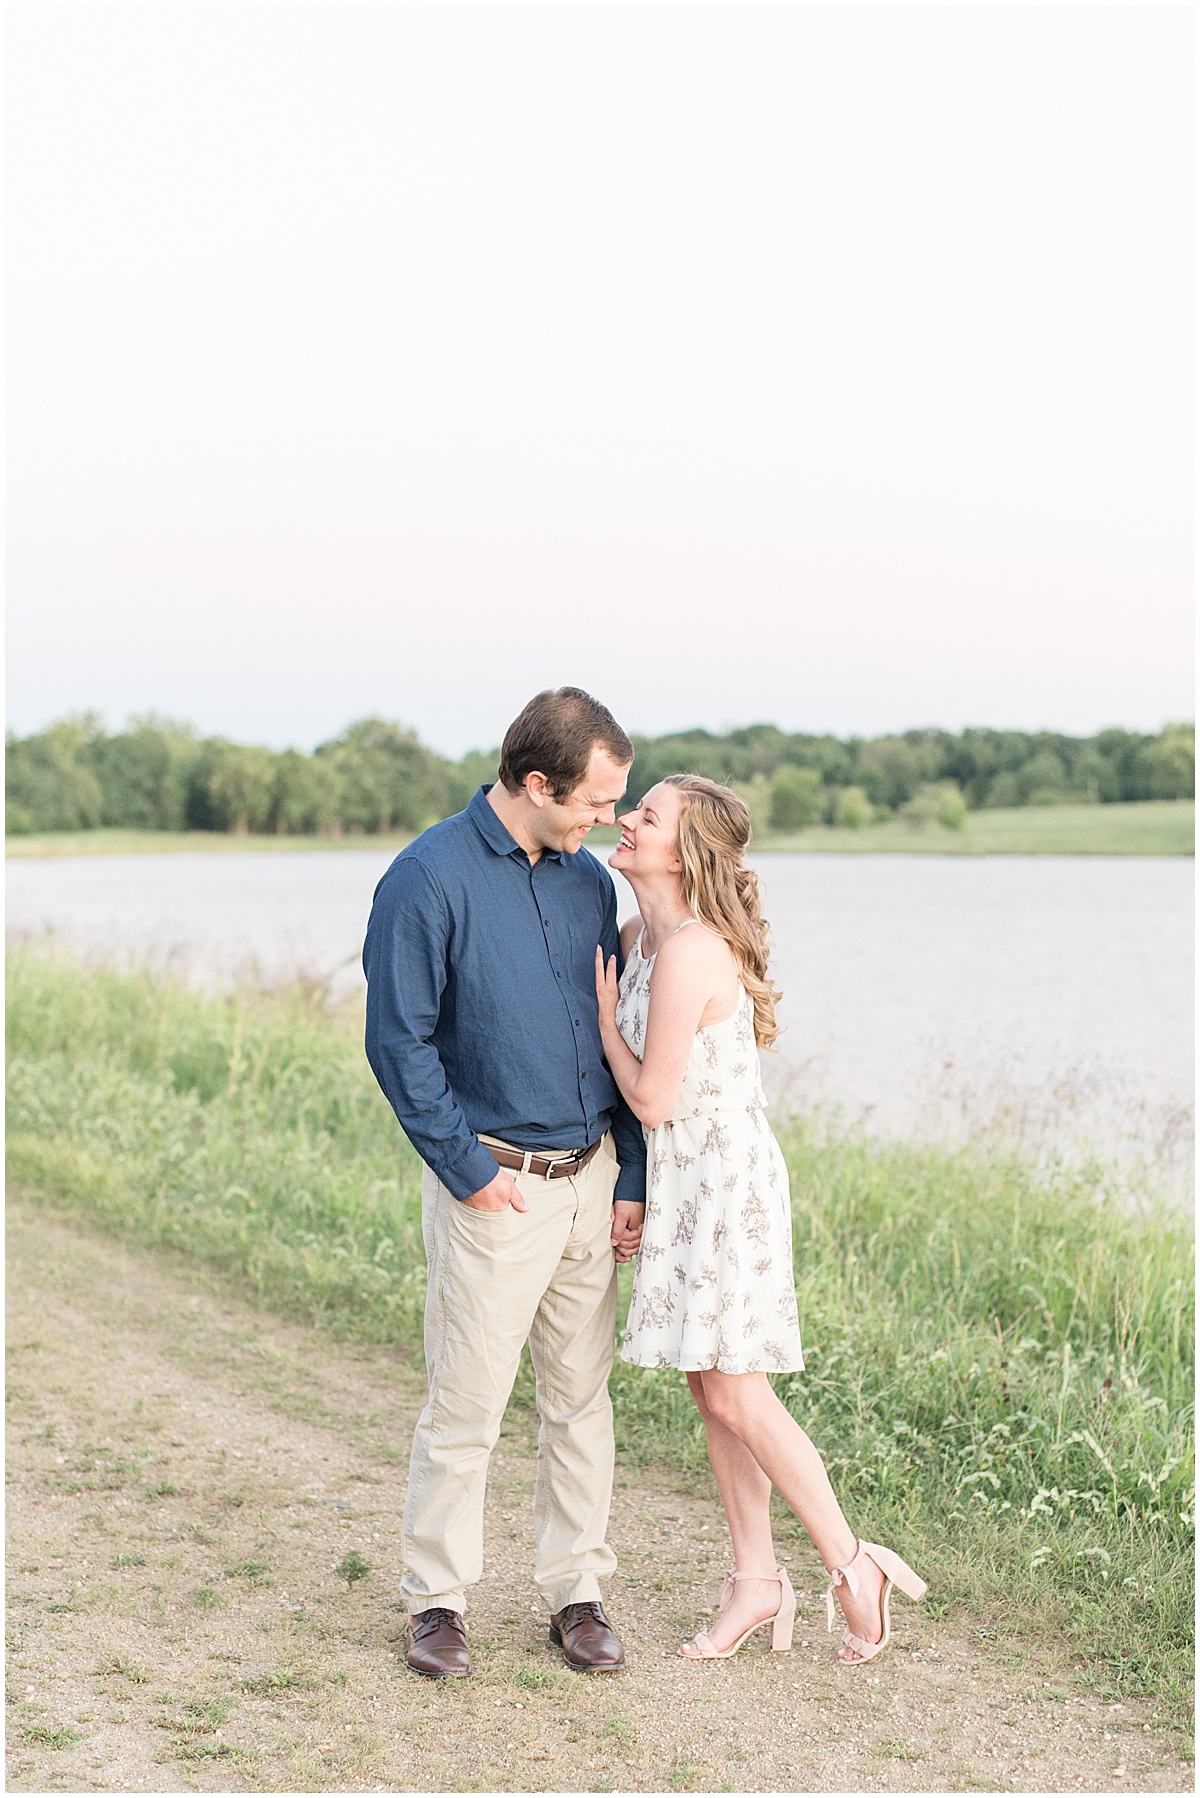 Holding hands next to water during Lakefront engagement photos in Lafayette, Indiana